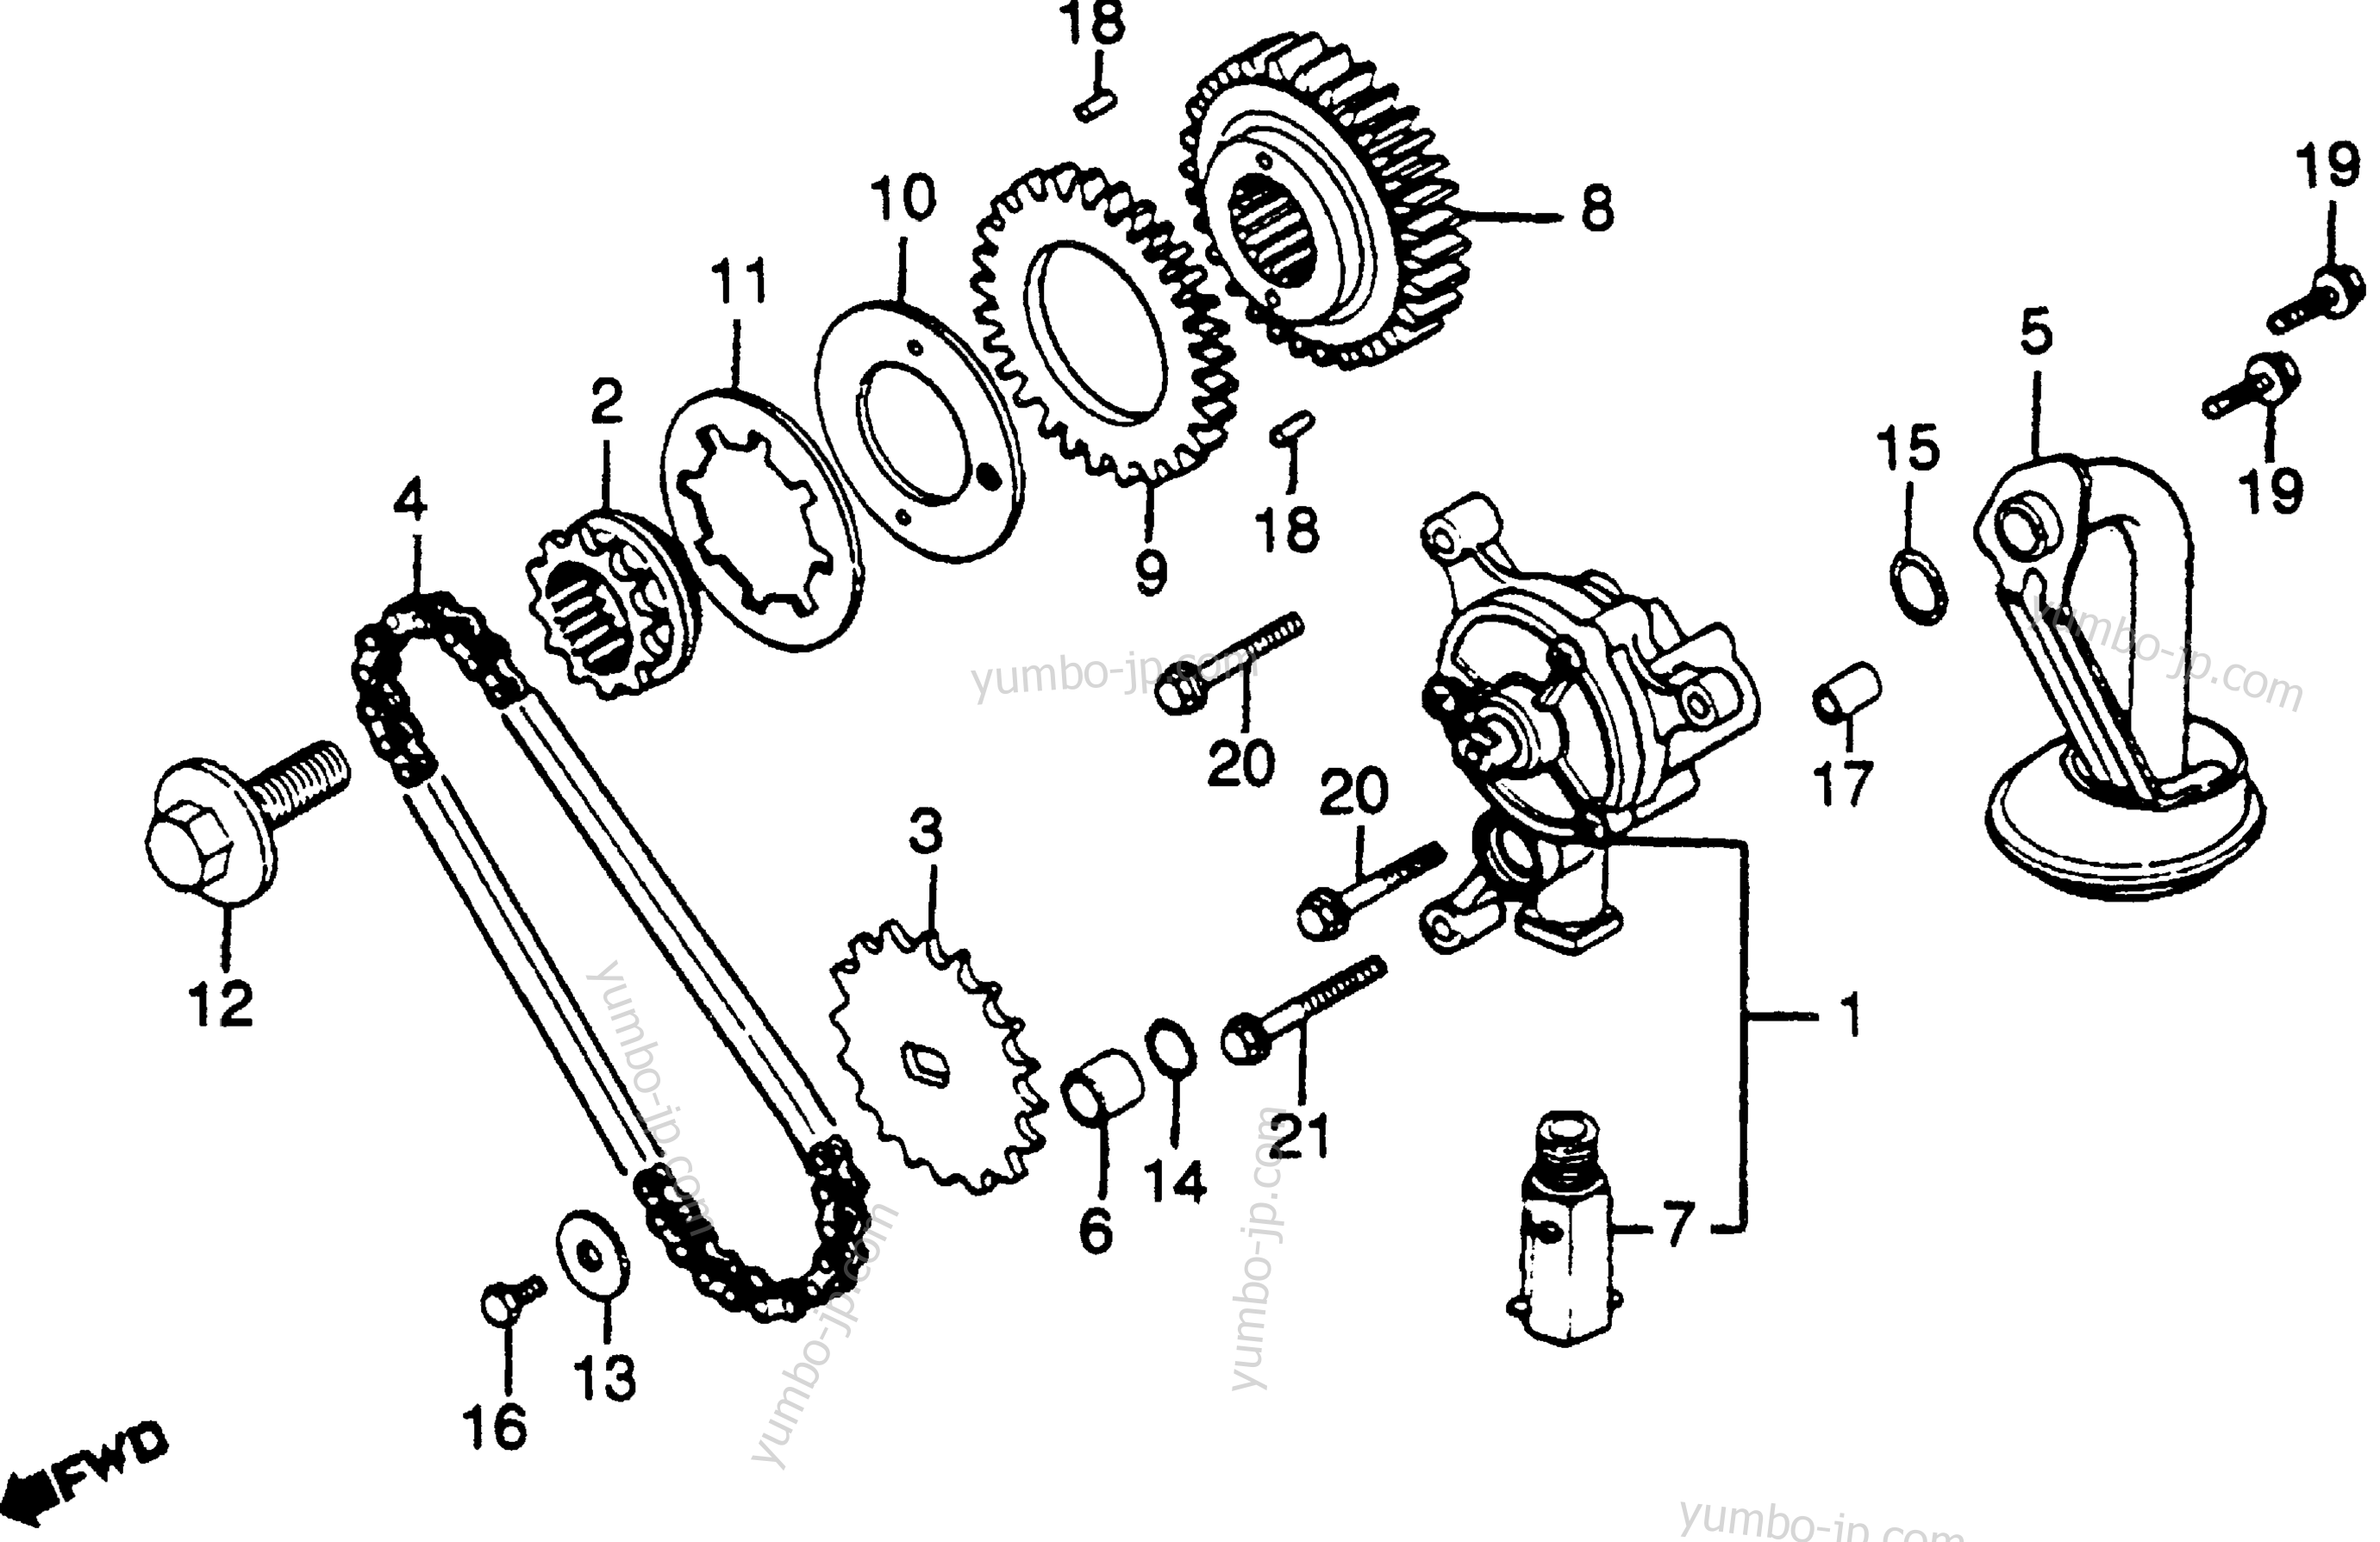 OIL PUMP / PRIMARY DRIVE GEAR for motorcycles HONDA GL500I A 1981 year